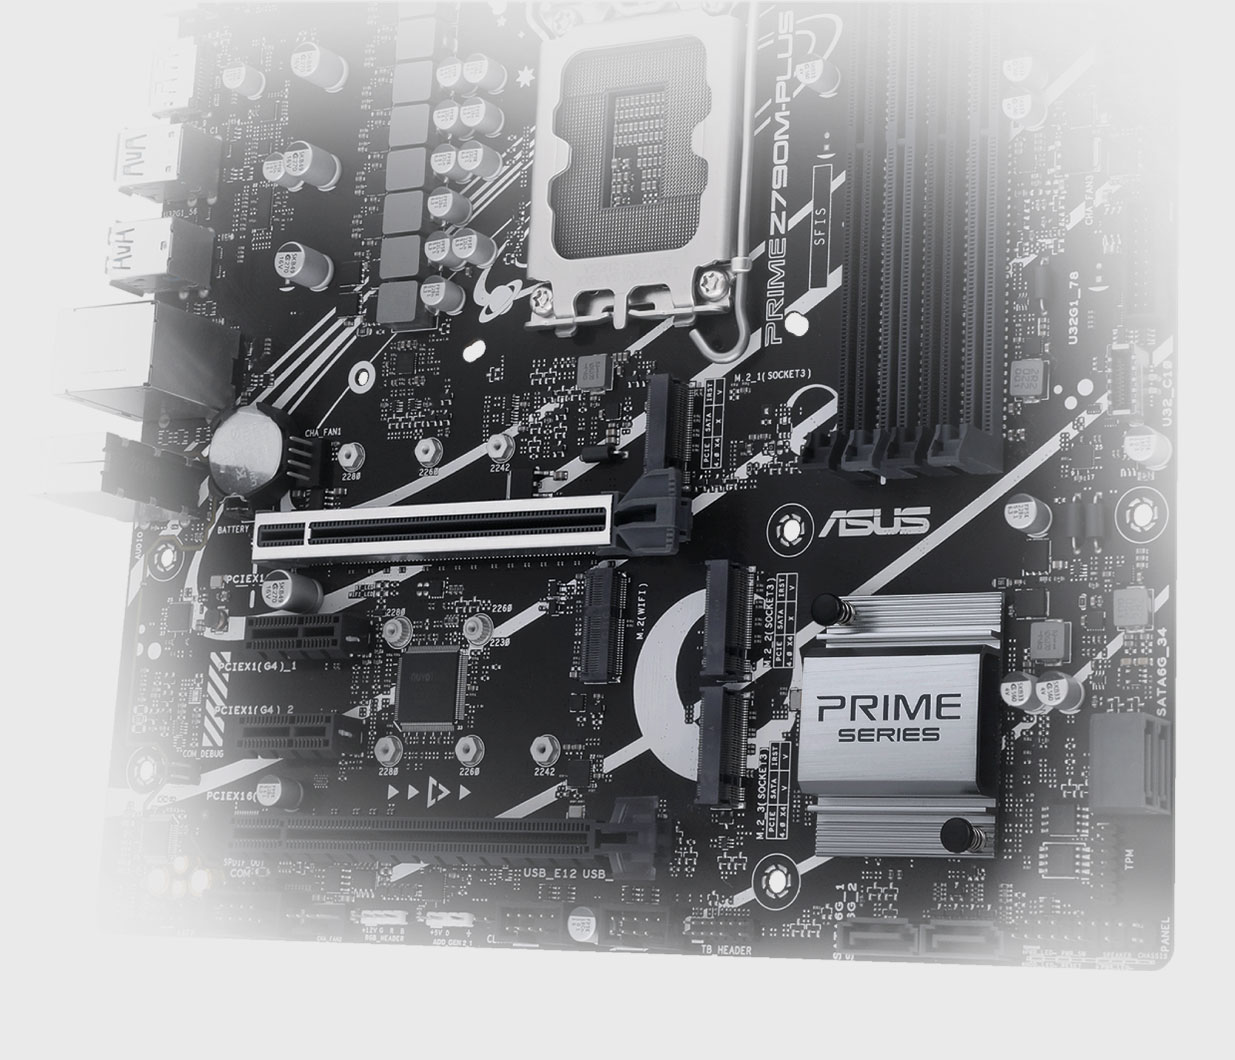 The PRIME Z790M-PLUS D4-CSM motherboard supports three M.2 slots.